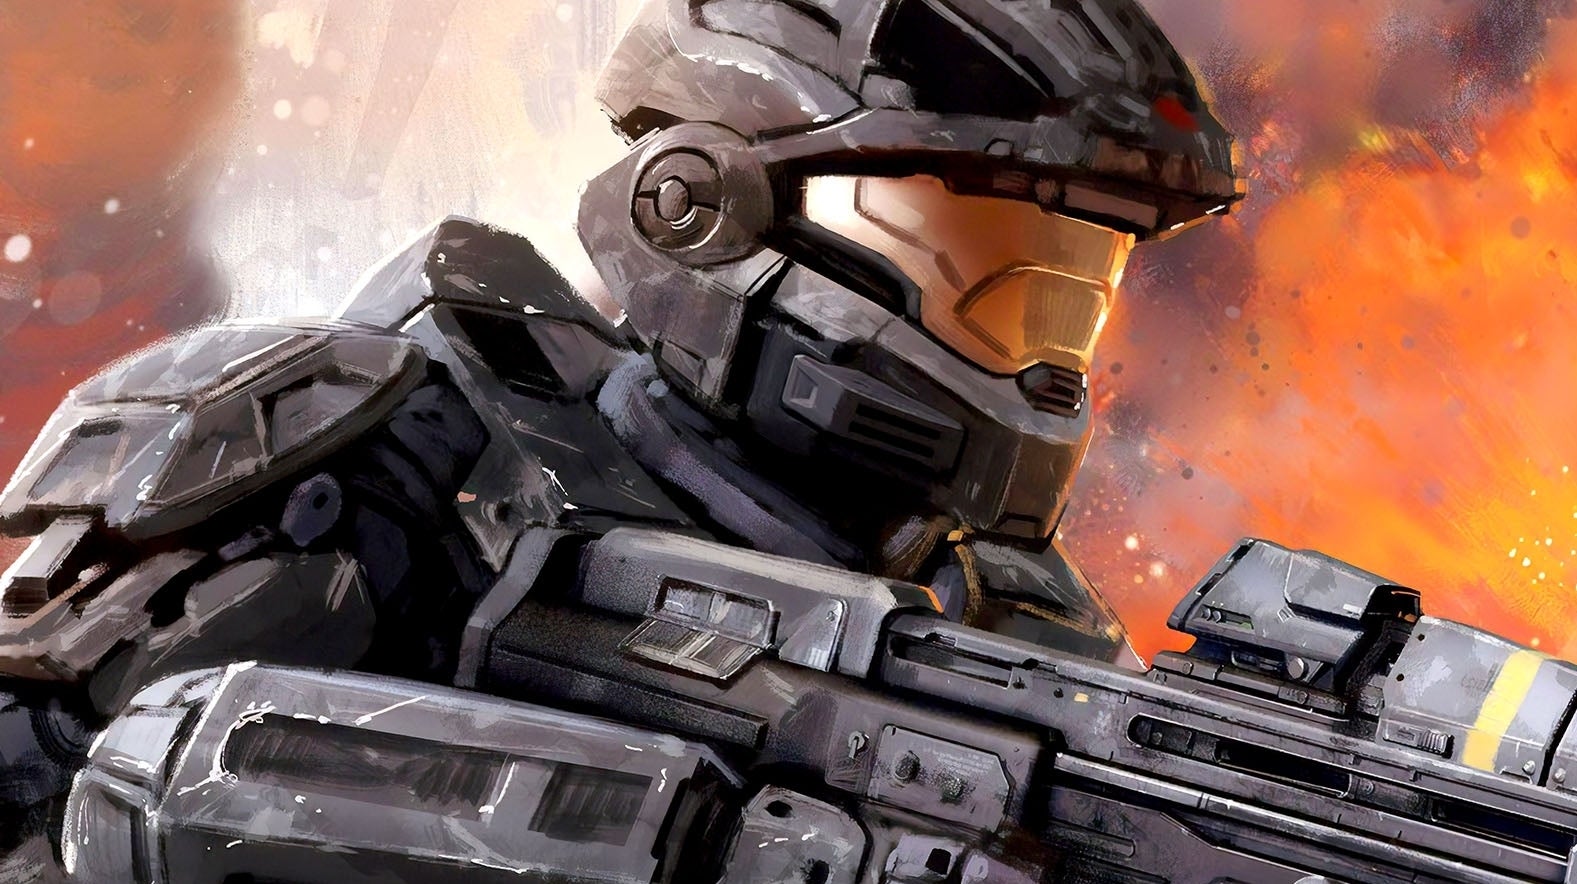 Image for Halo: Reach's remaster is OK - but key improvements are required